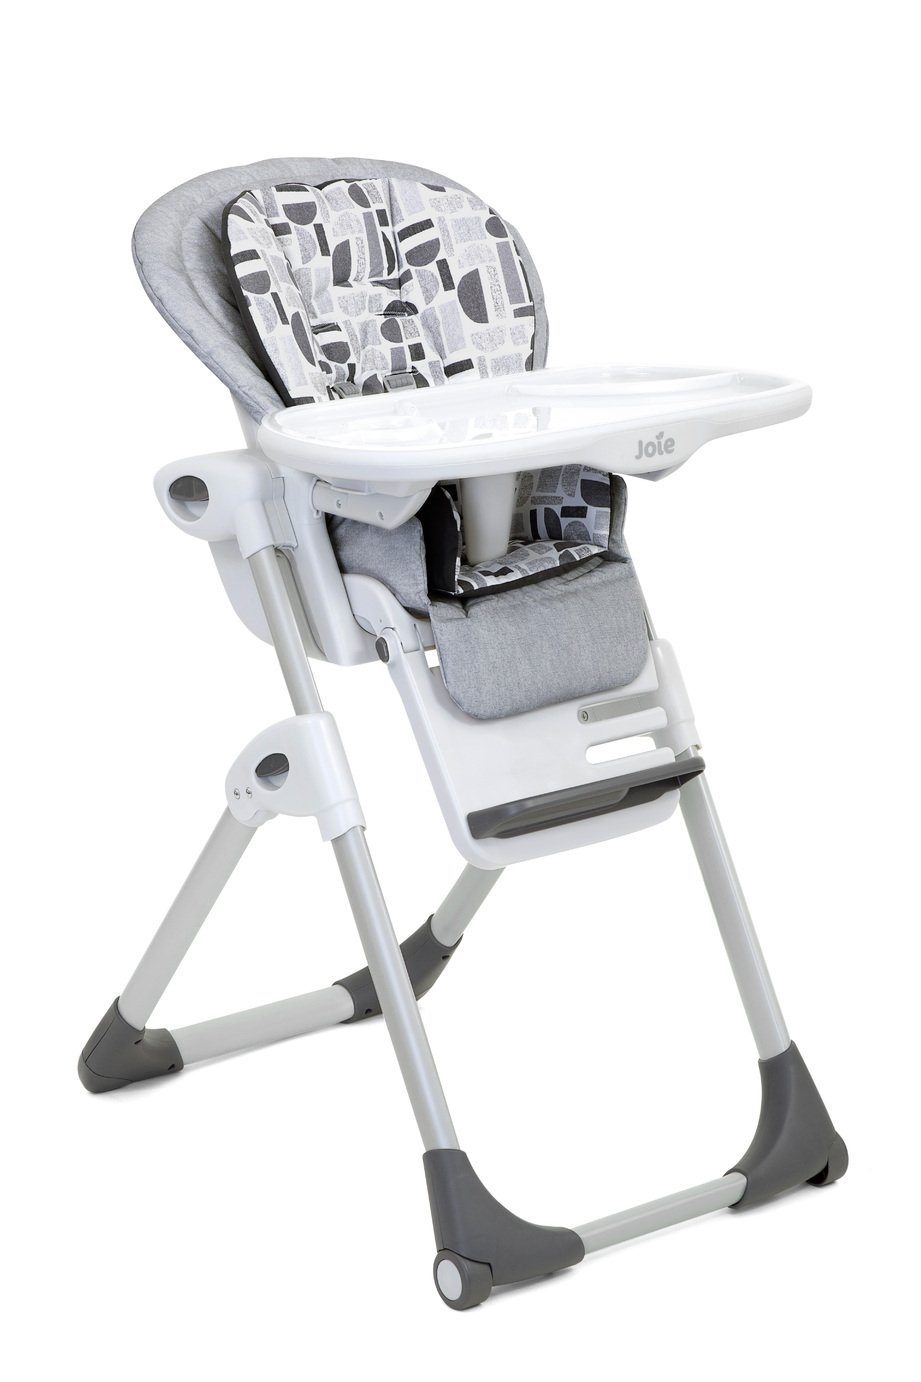 Joie Mimzy 2-in-1 Highchair Review